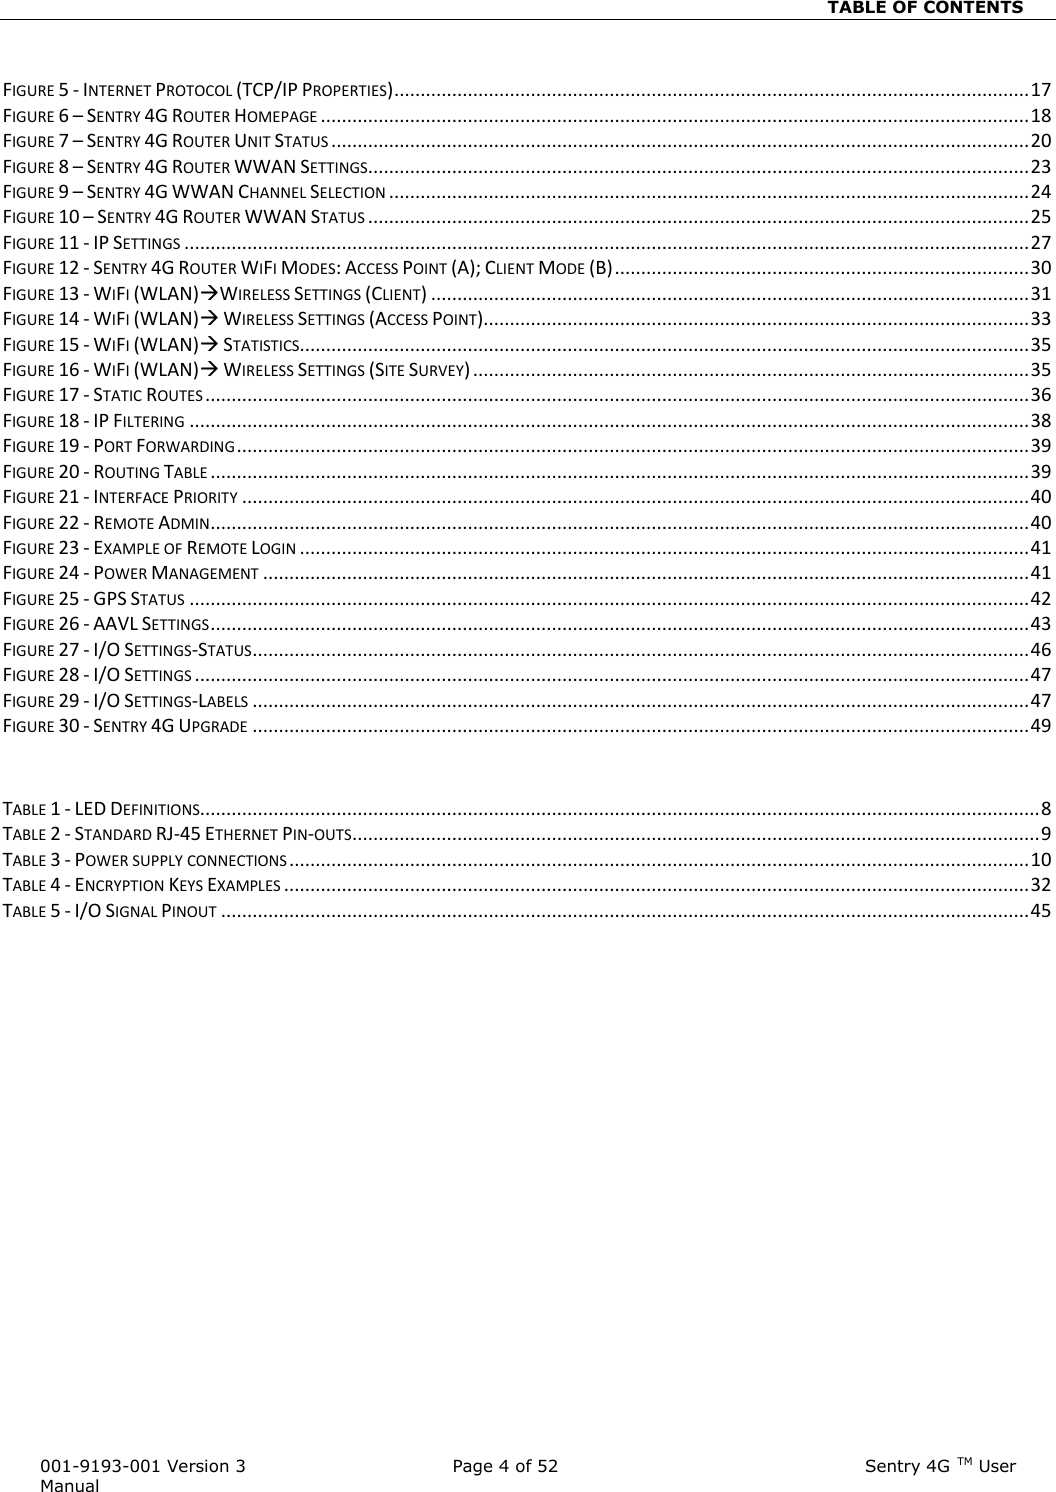                                                                          TABLE OF CONTENTS   001-9193-001 Version 3            Page 4 of 52                                                     Sentry 4G TM User Manual FIGURE 5 - INTERNET PROTOCOL (TCP/IP PROPERTIES) ......................................................................................................................... 17 FIGURE 6 – SENTRY 4G ROUTER HOMEPAGE ....................................................................................................................................... 18 FIGURE 7 – SENTRY 4G ROUTER UNIT STATUS ..................................................................................................................................... 20 FIGURE 8 – SENTRY 4G ROUTER WWAN SETTINGS .............................................................................................................................. 23 FIGURE 9 – SENTRY 4G WWAN CHANNEL SELECTION .......................................................................................................................... 24 FIGURE 10 – SENTRY 4G ROUTER WWAN STATUS .............................................................................................................................. 25 FIGURE 11 - IP SETTINGS ................................................................................................................................................................. 27 FIGURE 12 - SENTRY 4G ROUTER WIFI MODES: ACCESS POINT (A); CLIENT MODE (B) ............................................................................... 30 FIGURE 13 - WIFI (WLAN)WIRELESS SETTINGS (CLIENT) .................................................................................................................. 31 FIGURE 14 - WIFI (WLAN) WIRELESS SETTINGS (ACCESS POINT) ........................................................................................................ 33 FIGURE 15 - WIFI (WLAN) STATISTICS........................................................................................................................................... 35 FIGURE 16 - WIFI (WLAN) WIRELESS SETTINGS (SITE SURVEY) .......................................................................................................... 35 FIGURE 17 - STATIC ROUTES ............................................................................................................................................................. 36 FIGURE 18 - IP FILTERING ................................................................................................................................................................ 38 FIGURE 19 - PORT FORWARDING ....................................................................................................................................................... 39 FIGURE 20 - ROUTING TABLE ............................................................................................................................................................ 39 FIGURE 21 - INTERFACE PRIORITY ...................................................................................................................................................... 40 FIGURE 22 - REMOTE ADMIN ............................................................................................................................................................ 40 FIGURE 23 - EXAMPLE OF REMOTE LOGIN ........................................................................................................................................... 41 FIGURE 24 - POWER MANAGEMENT .................................................................................................................................................. 41 FIGURE 25 - GPS STATUS ................................................................................................................................................................ 42 FIGURE 26 - AAVL SETTINGS ............................................................................................................................................................ 43 FIGURE 27 - I/O SETTINGS-STATUS .................................................................................................................................................... 46 FIGURE 28 - I/O SETTINGS ............................................................................................................................................................... 47 FIGURE 29 - I/O SETTINGS-LABELS .................................................................................................................................................... 47 FIGURE 30 - SENTRY 4G UPGRADE .................................................................................................................................................... 49   TABLE 1 - LED DEFINITIONS................................................................................................................................................................ 8 TABLE 2 - STANDARD RJ-45 ETHERNET PIN-OUTS ................................................................................................................................... 9 TABLE 3 - POWER SUPPLY CONNECTIONS ............................................................................................................................................. 10 TABLE 4 - ENCRYPTION KEYS EXAMPLES .............................................................................................................................................. 32 TABLE 5 - I/O SIGNAL PINOUT .......................................................................................................................................................... 45 